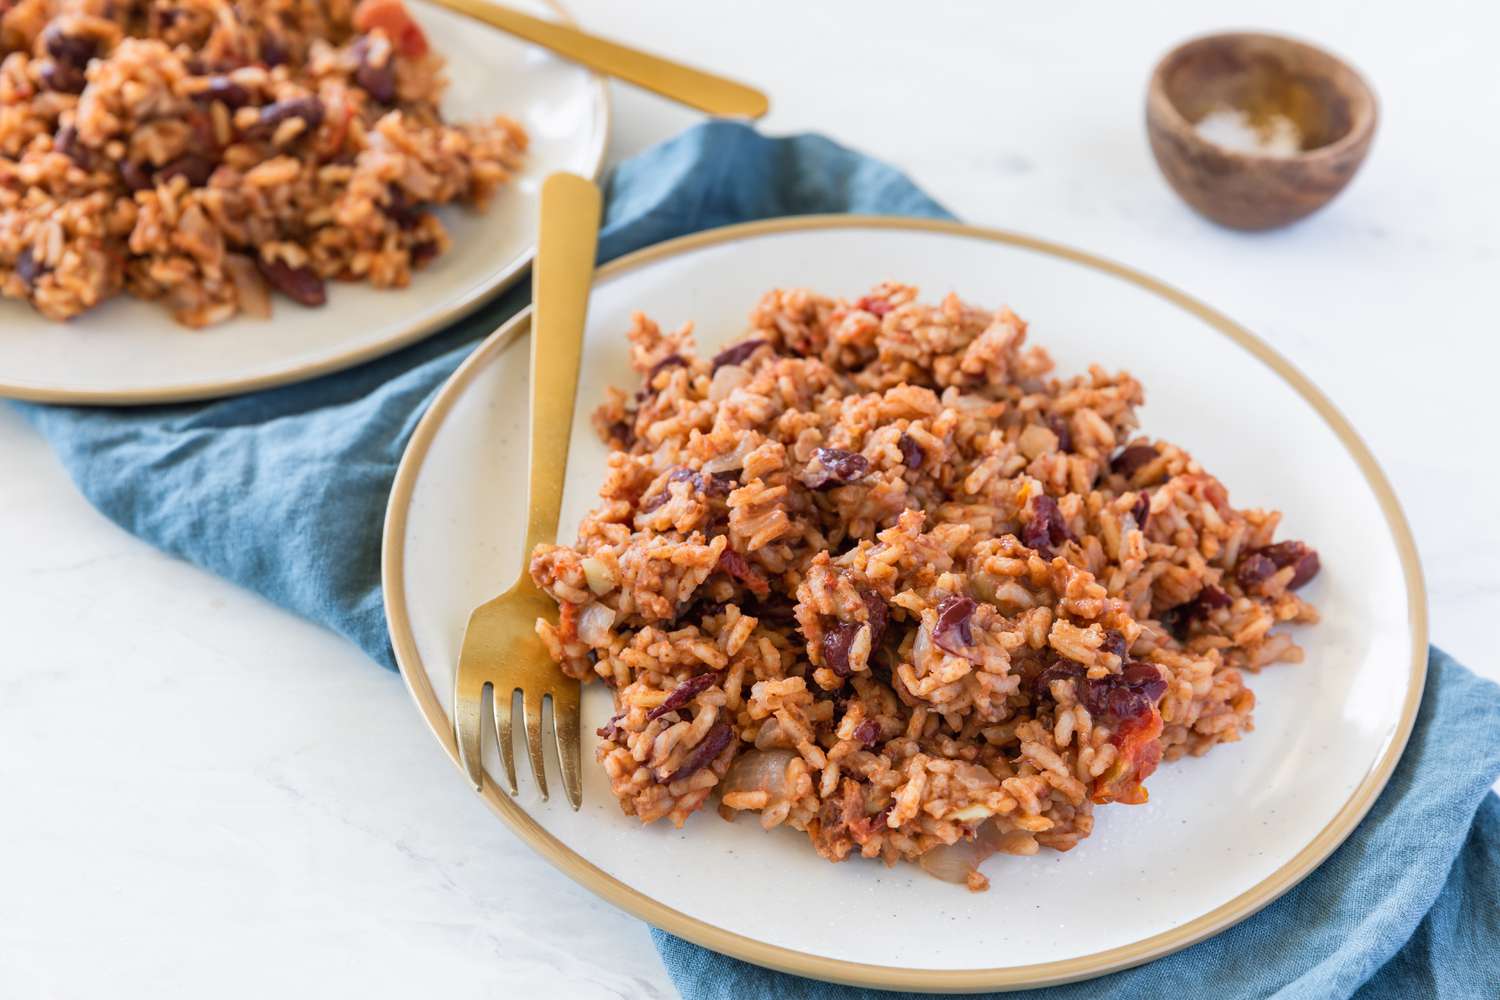 It’s Time to Find Out What Your 🥳 Holiday Vibe Is With the 🎄 Christmas Feast You Plan Beans and rice